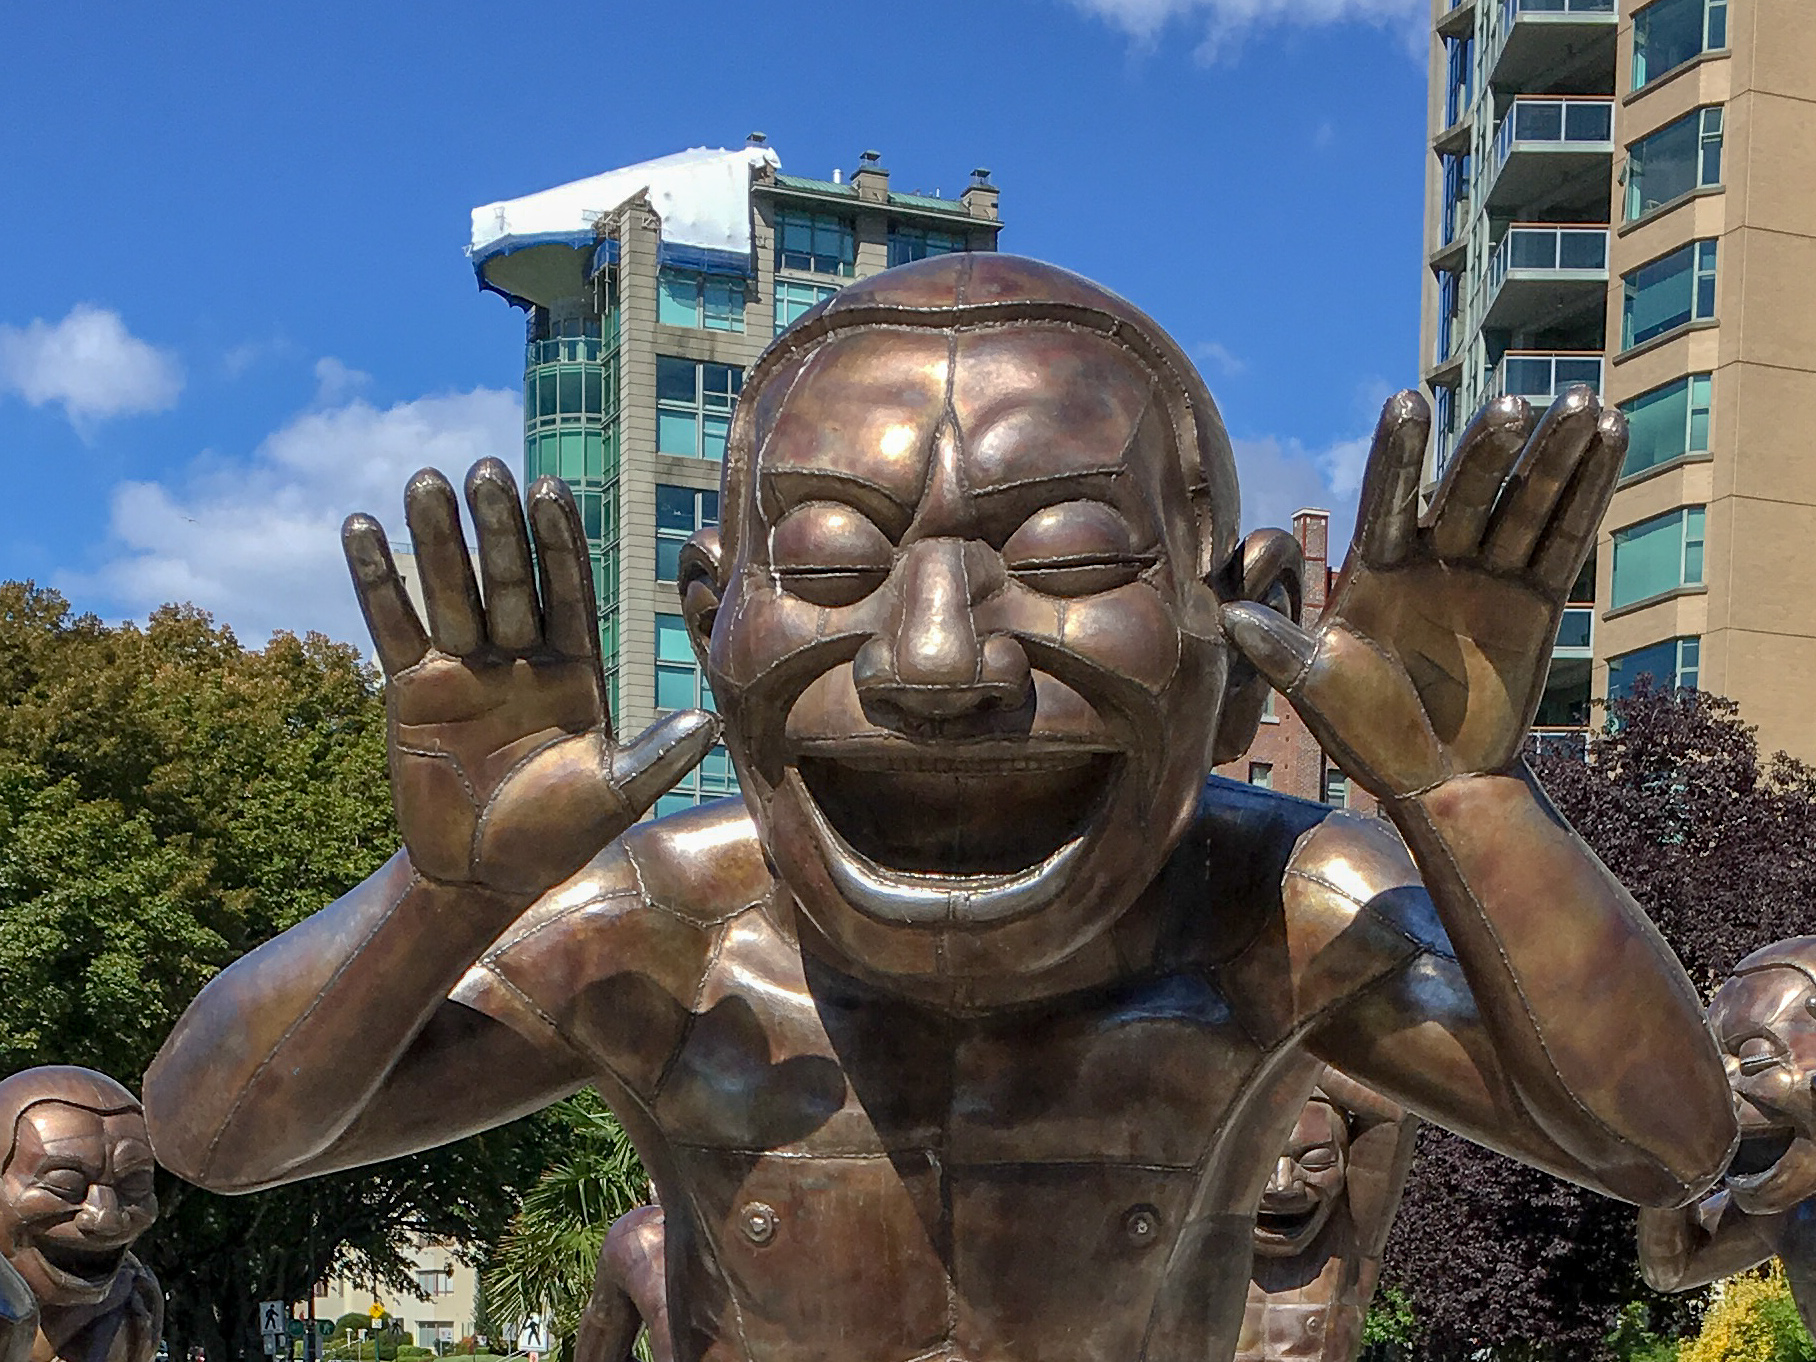 A-maze-ing Laughter in Vancouver